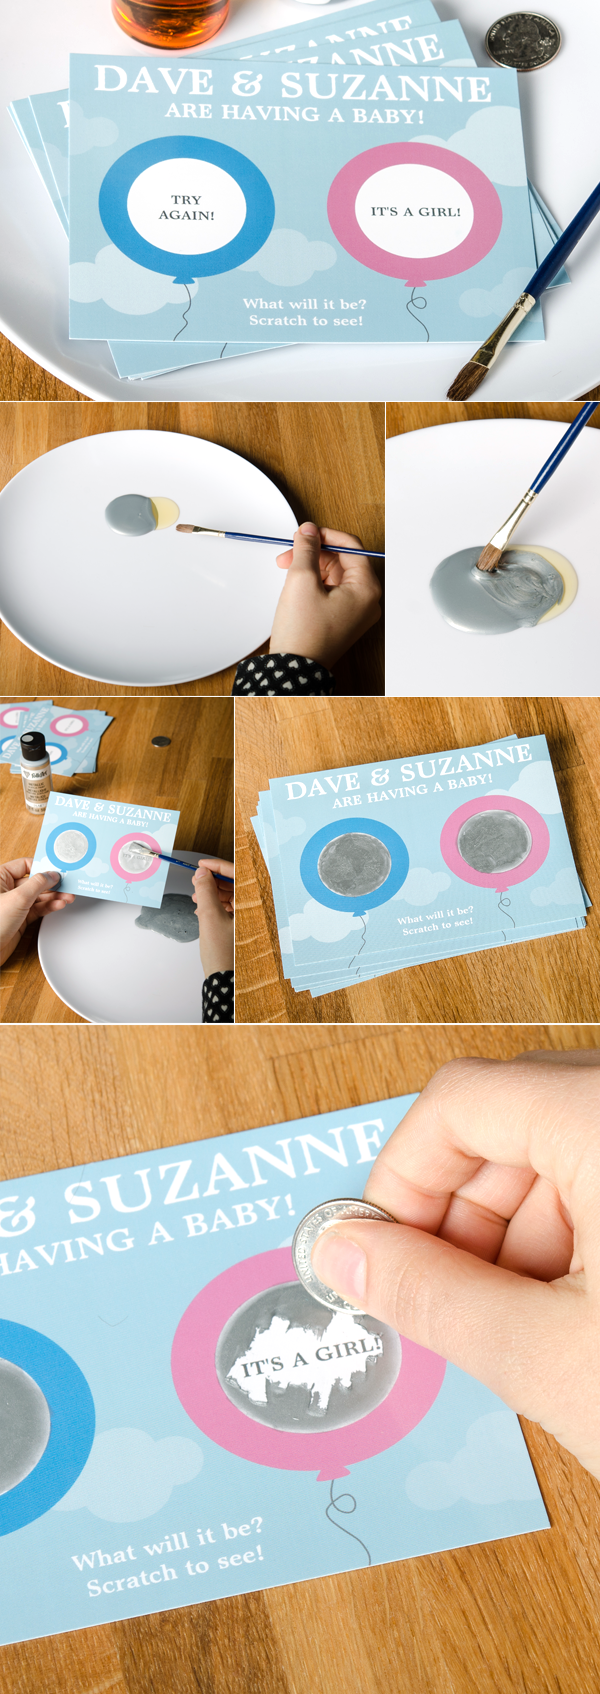 Baby shower gender reveal diy card. Great idea to adapt for other celebrations..